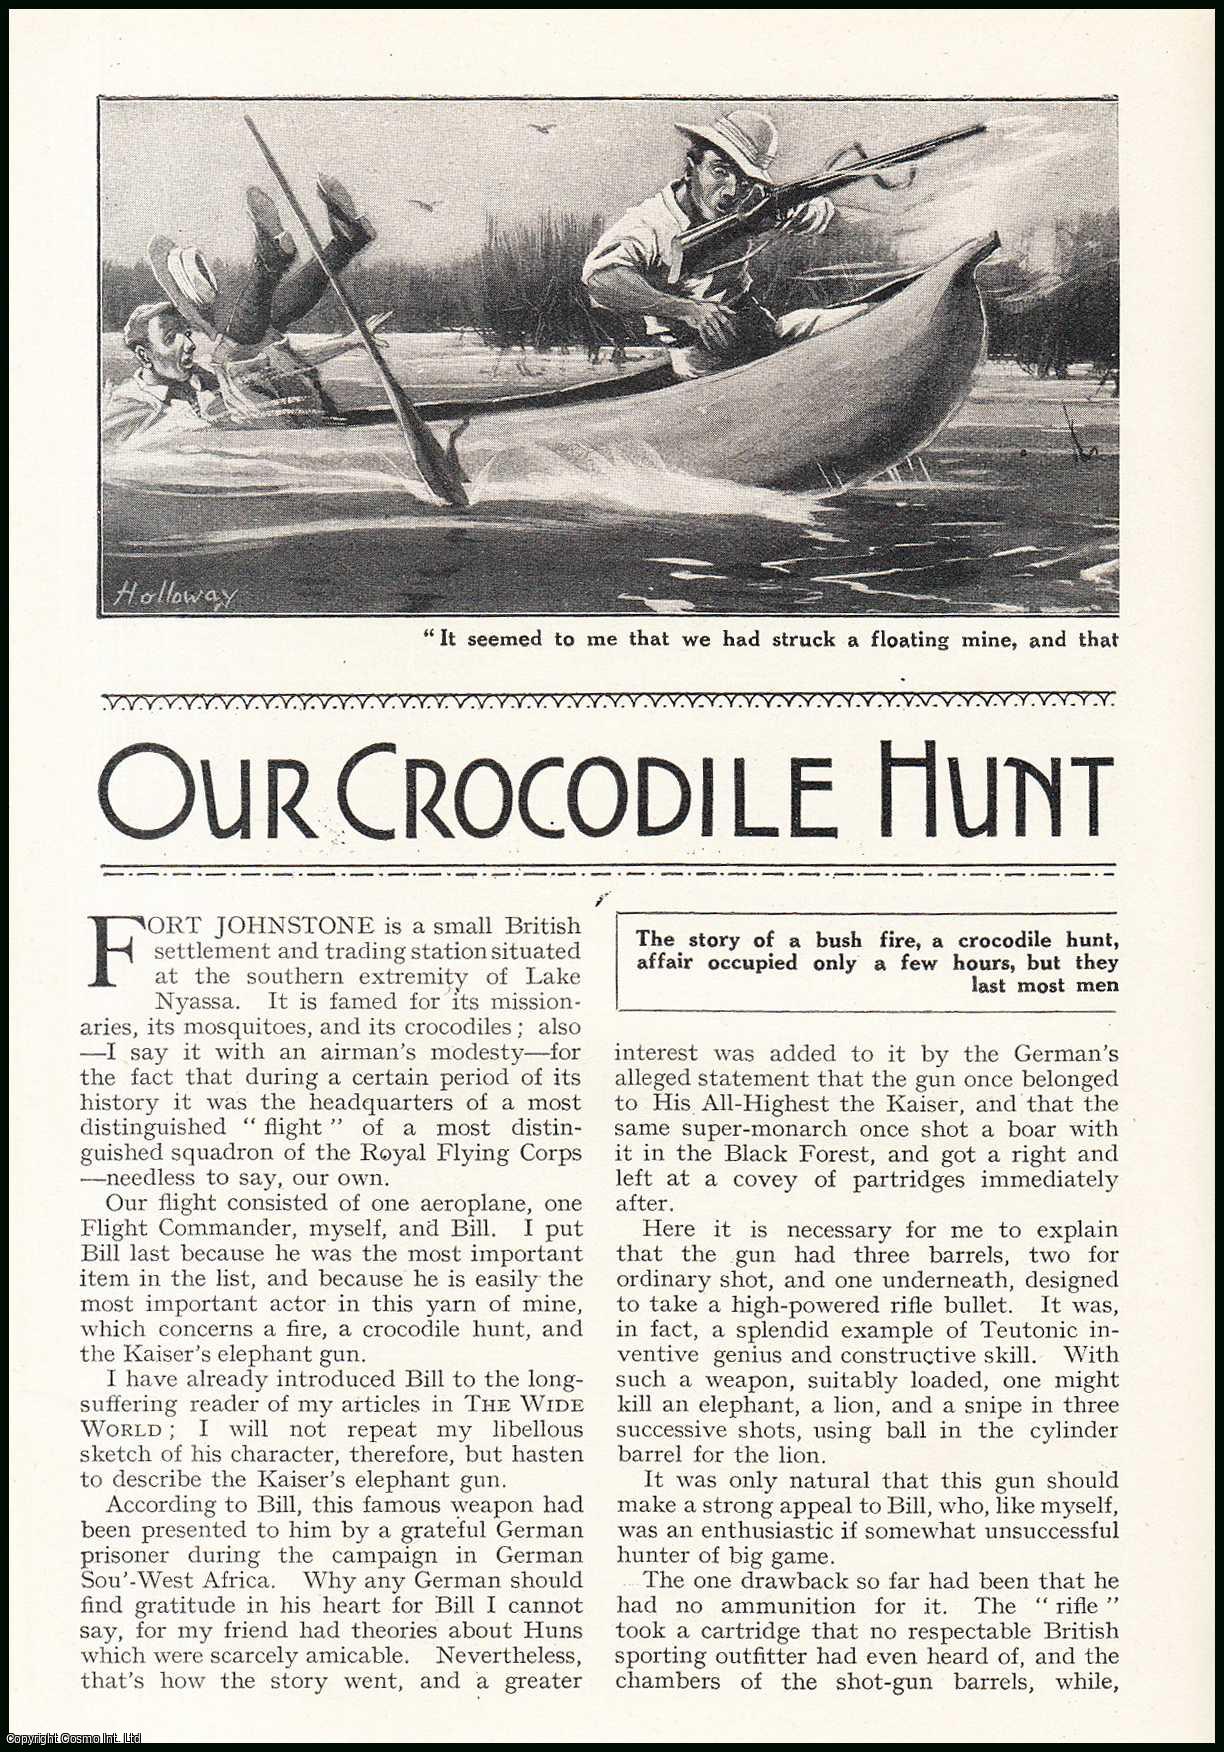 Leo Walmsley, illustrated by W.H. Holloway. - Our Crocodile Hunt at Fort Johnstone, Lake Nyassa. An uncommon original article from the Wide World Magazine, 1922.